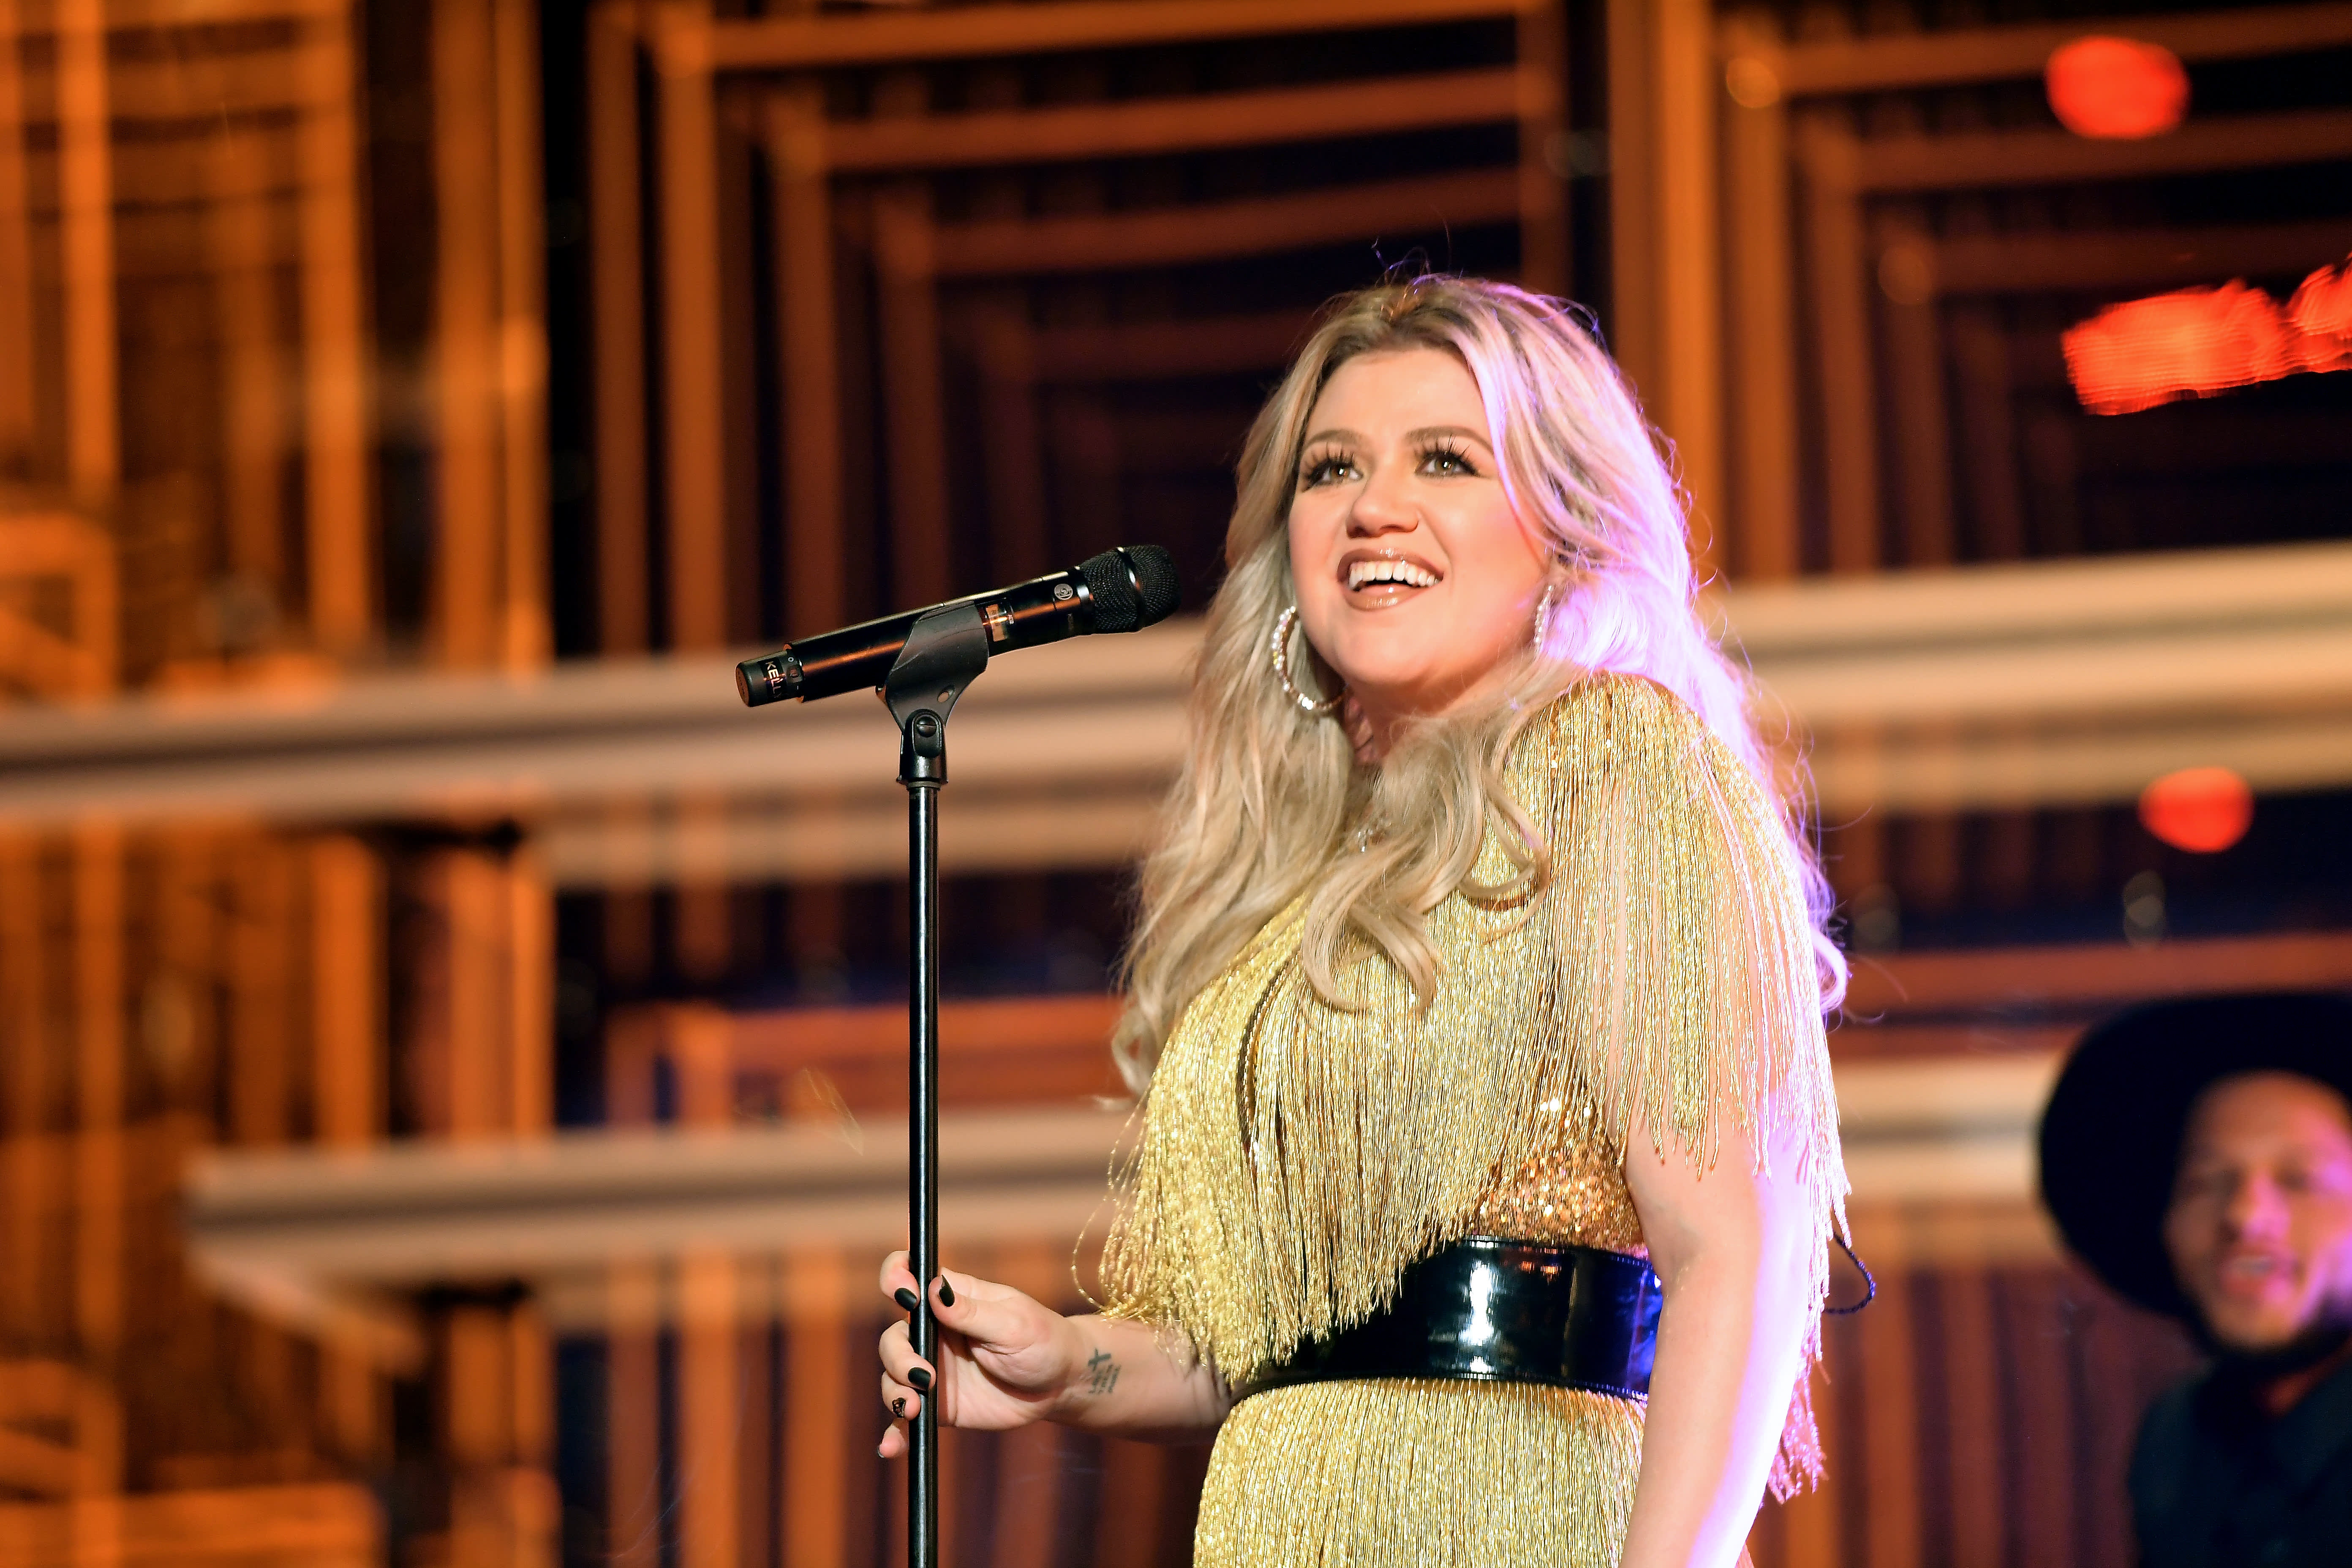 How Kelly Clarkson Went From Broke To Winning American Idol